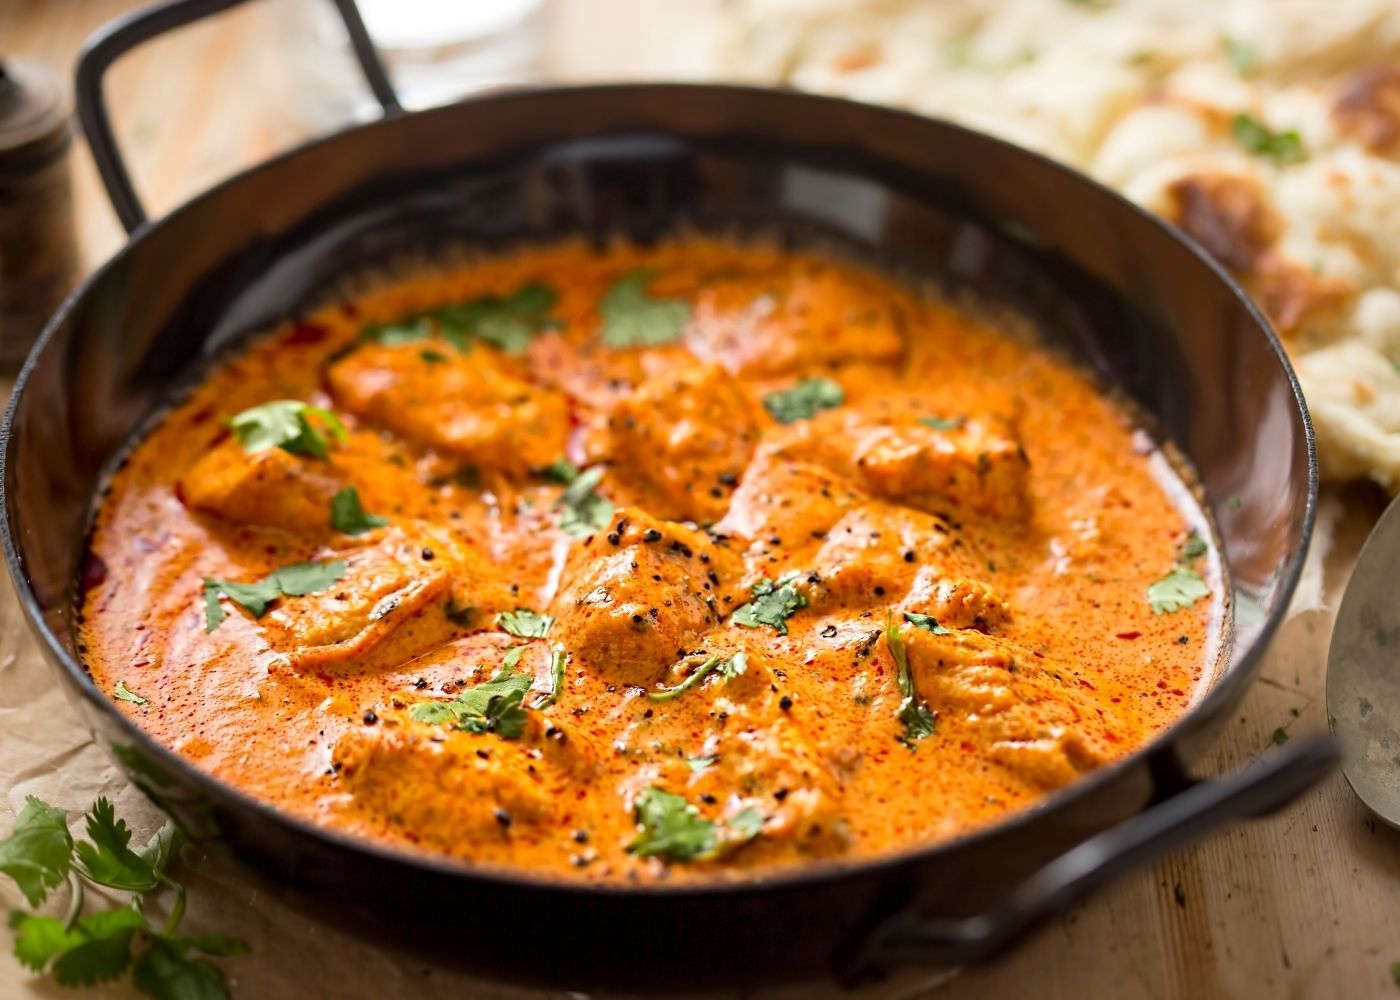 Southern Indian coconut chicken